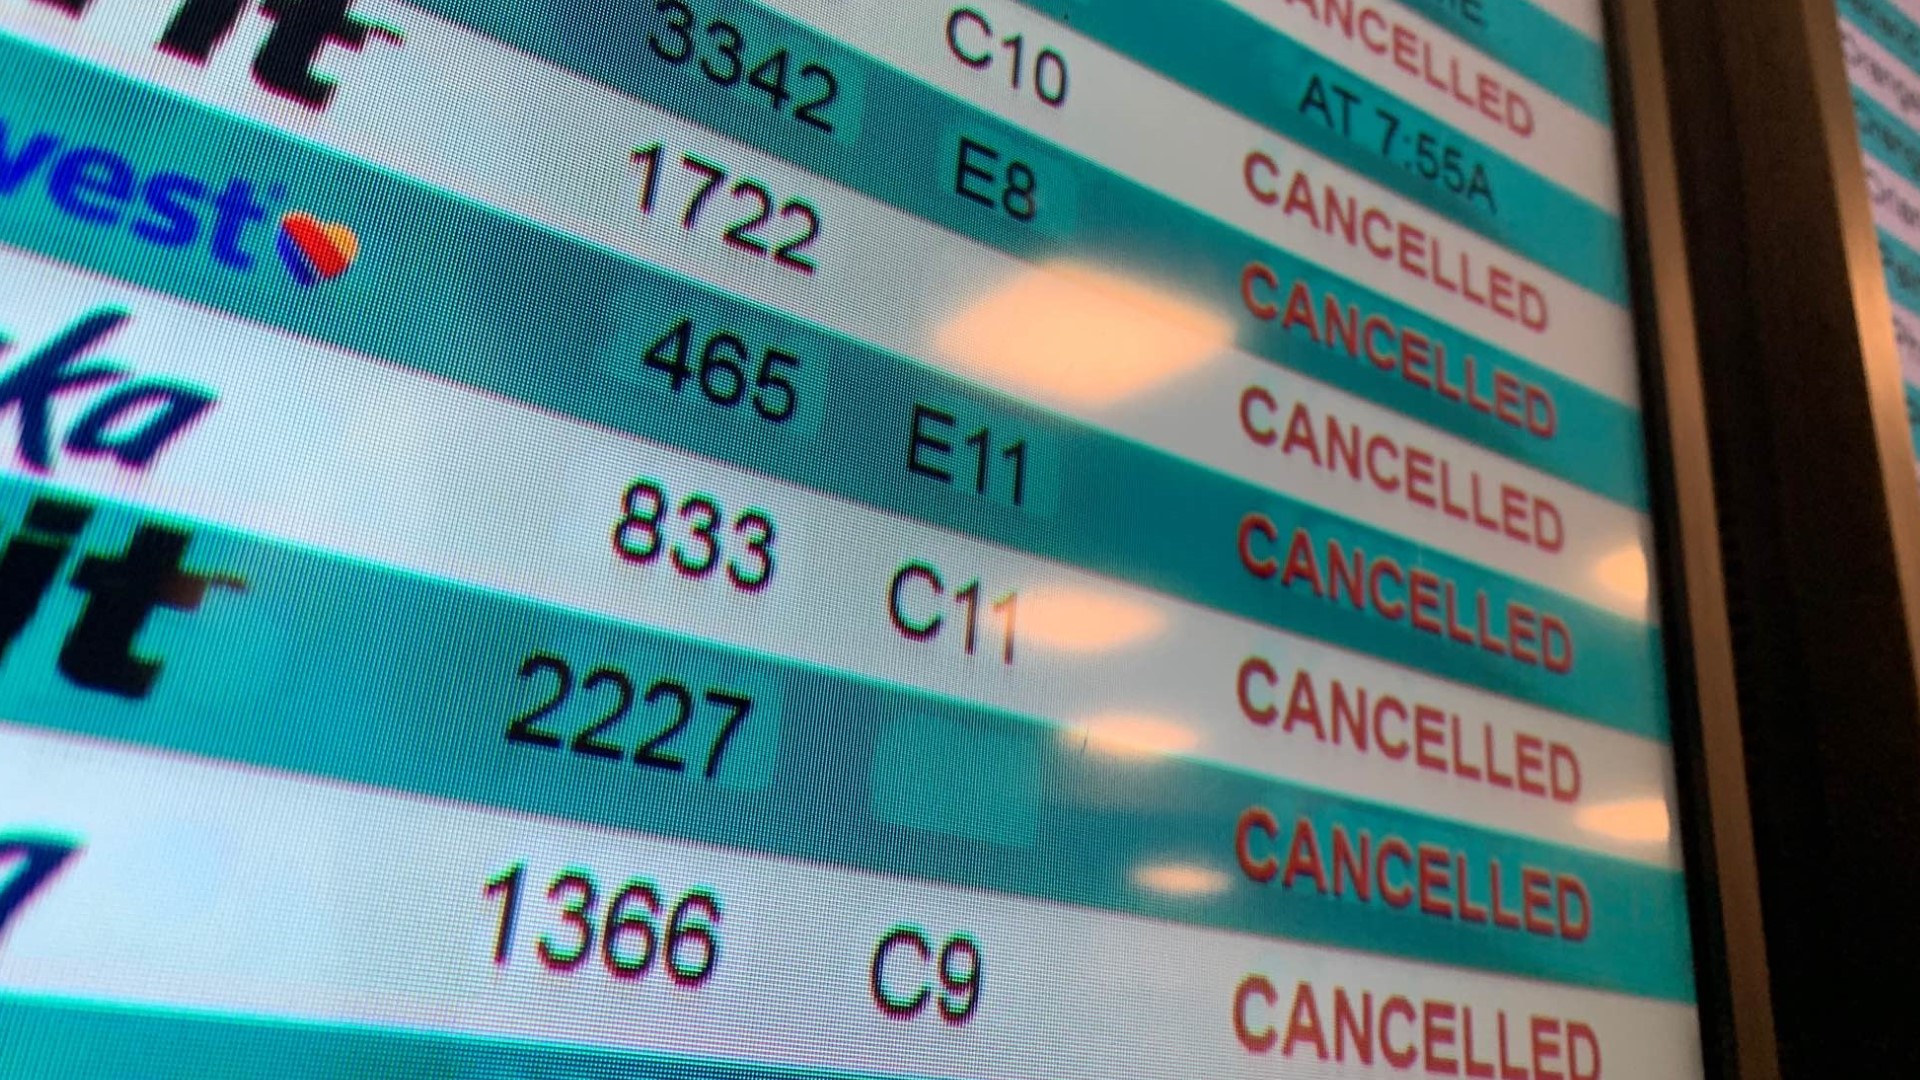 KGW's Evan Watson estimated early Friday morning that 80-85% of all flights Friday at Portland International Airport are canceled.